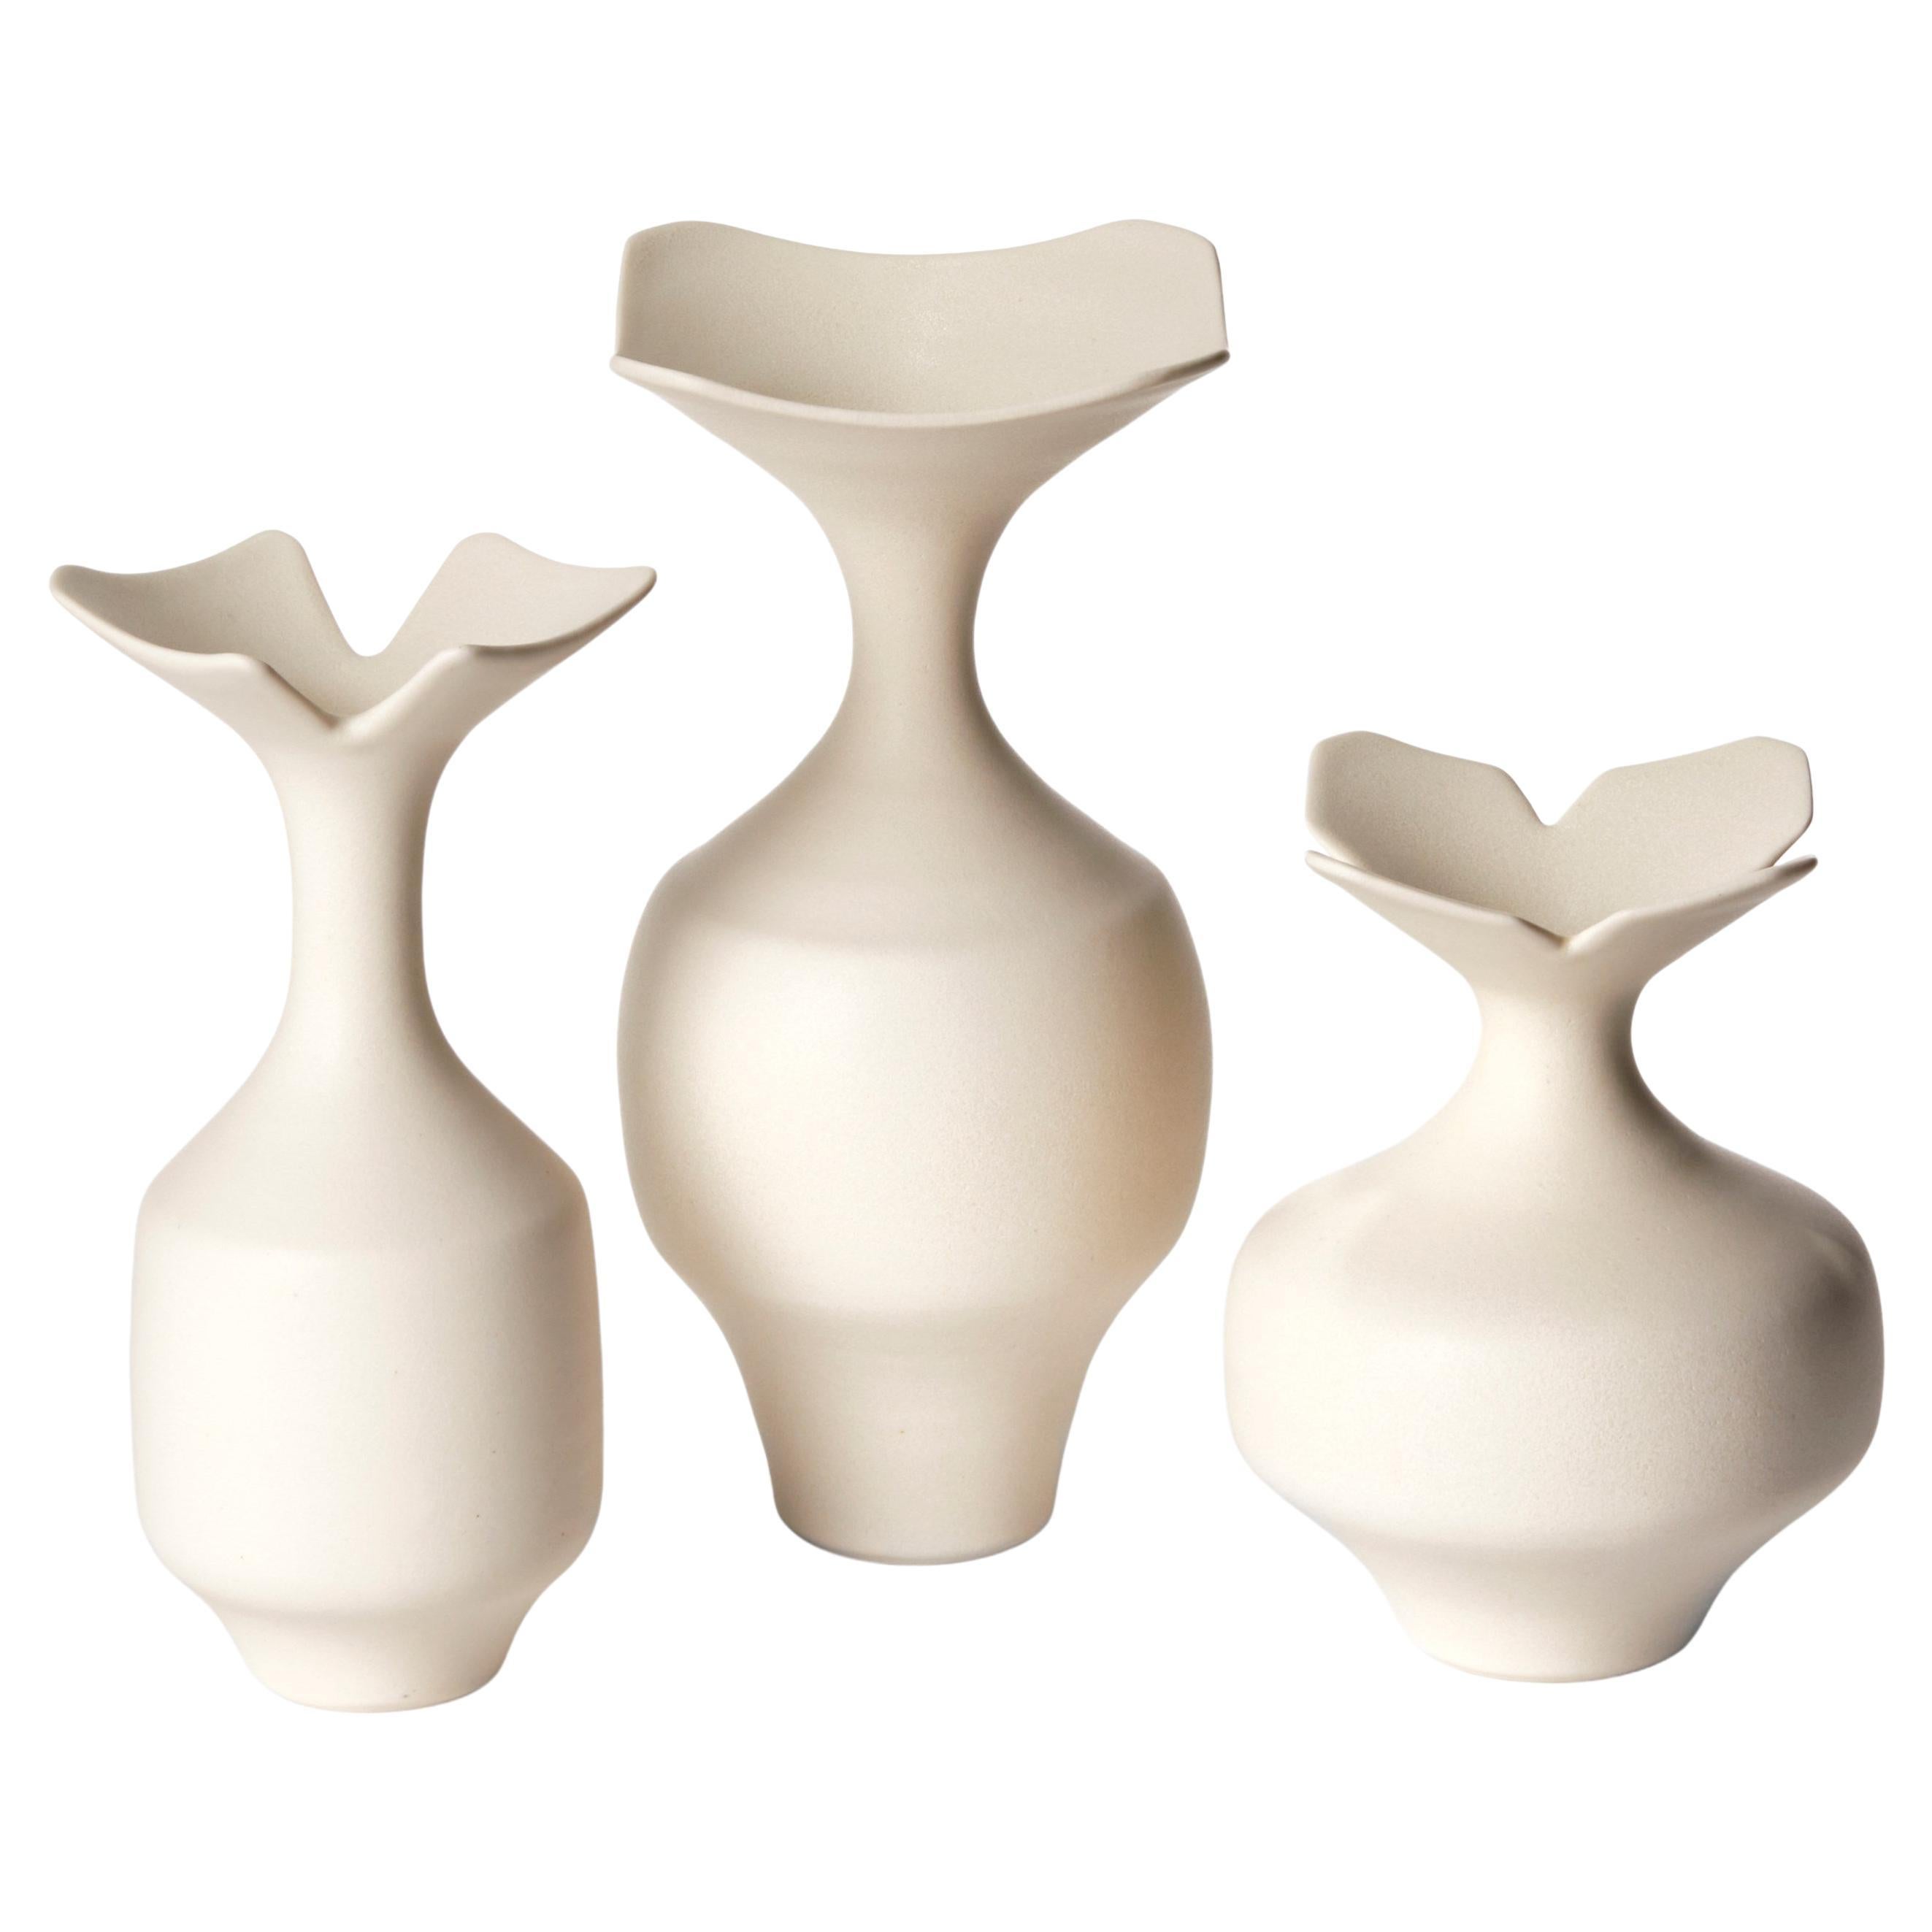  Butter Trio, set of three soft white / cream porcelain vases by Vivienne Foley